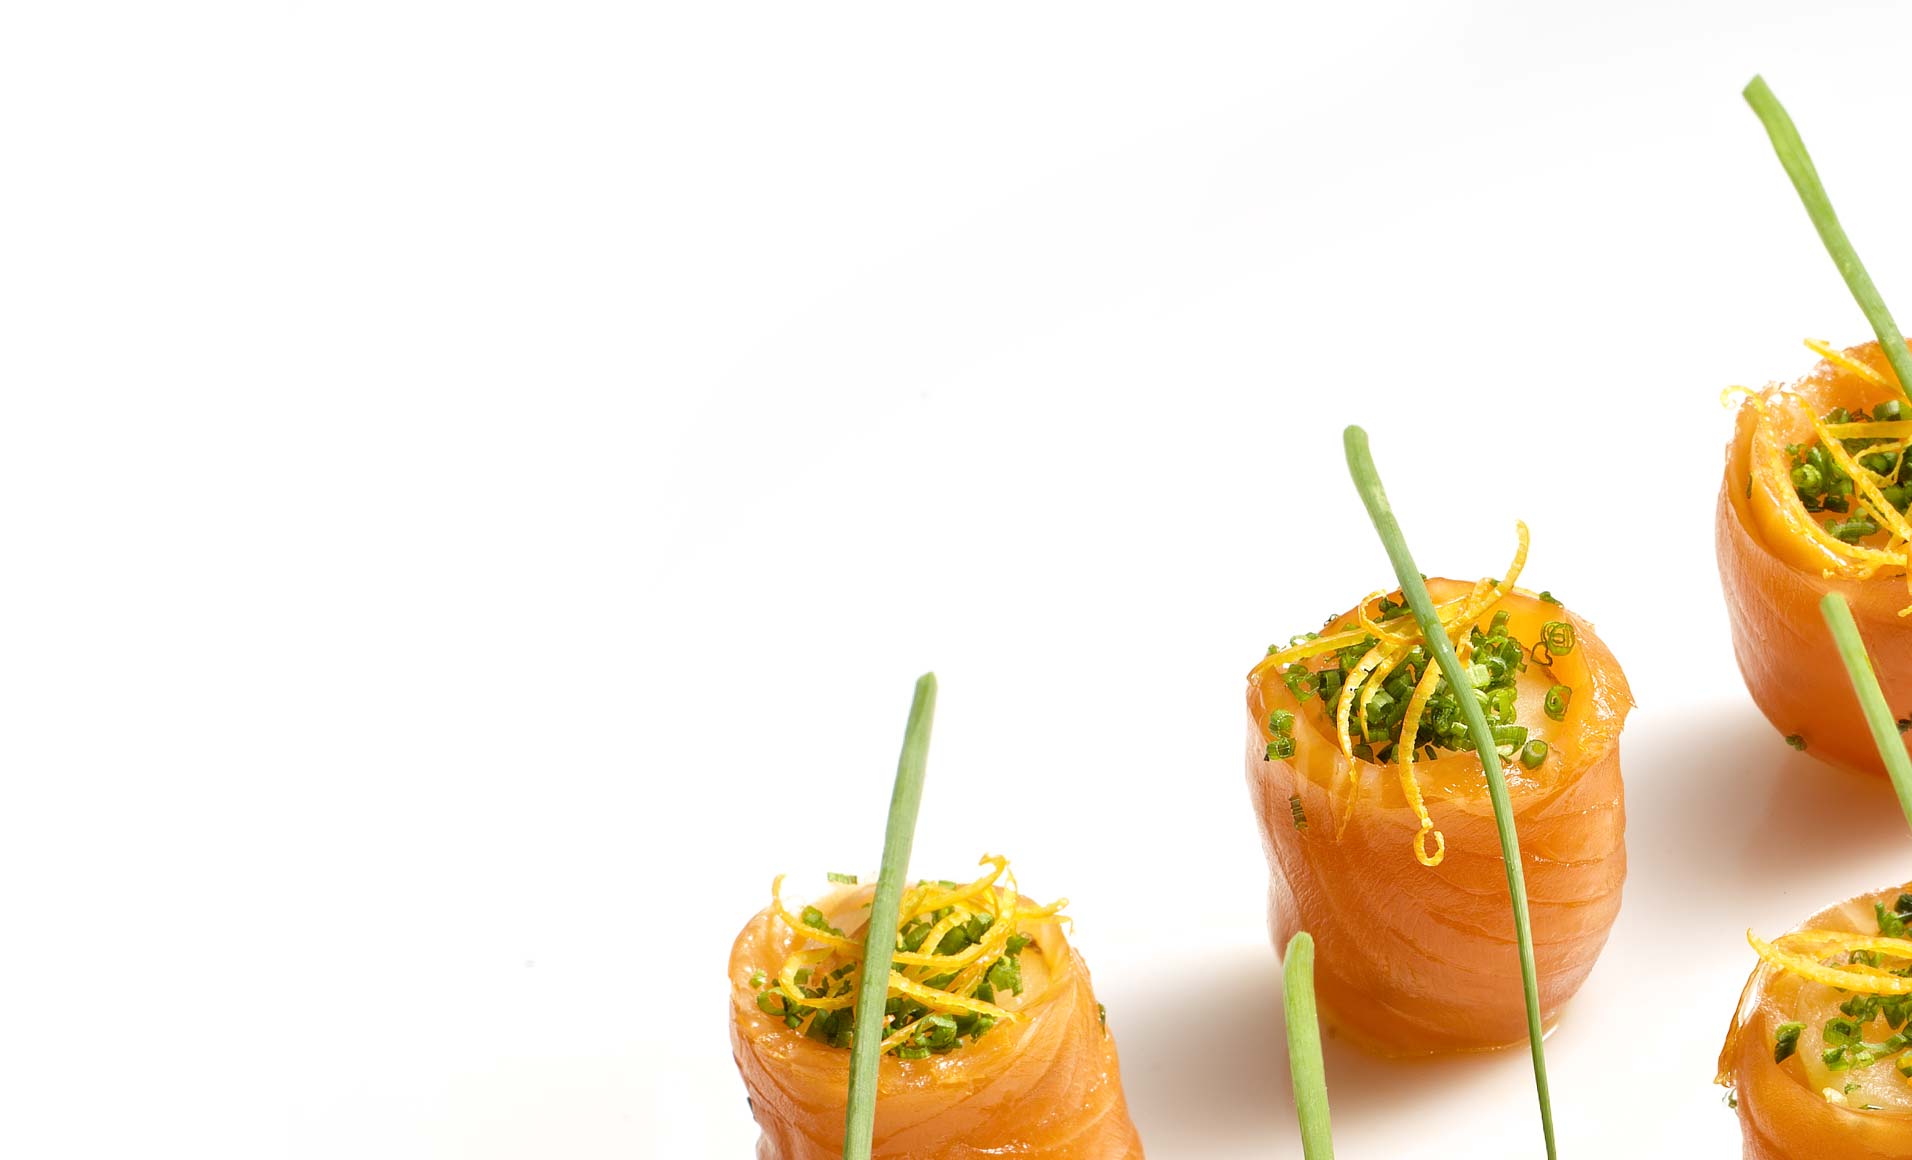 Small potatoes with chives, orange and marinated salmon trout